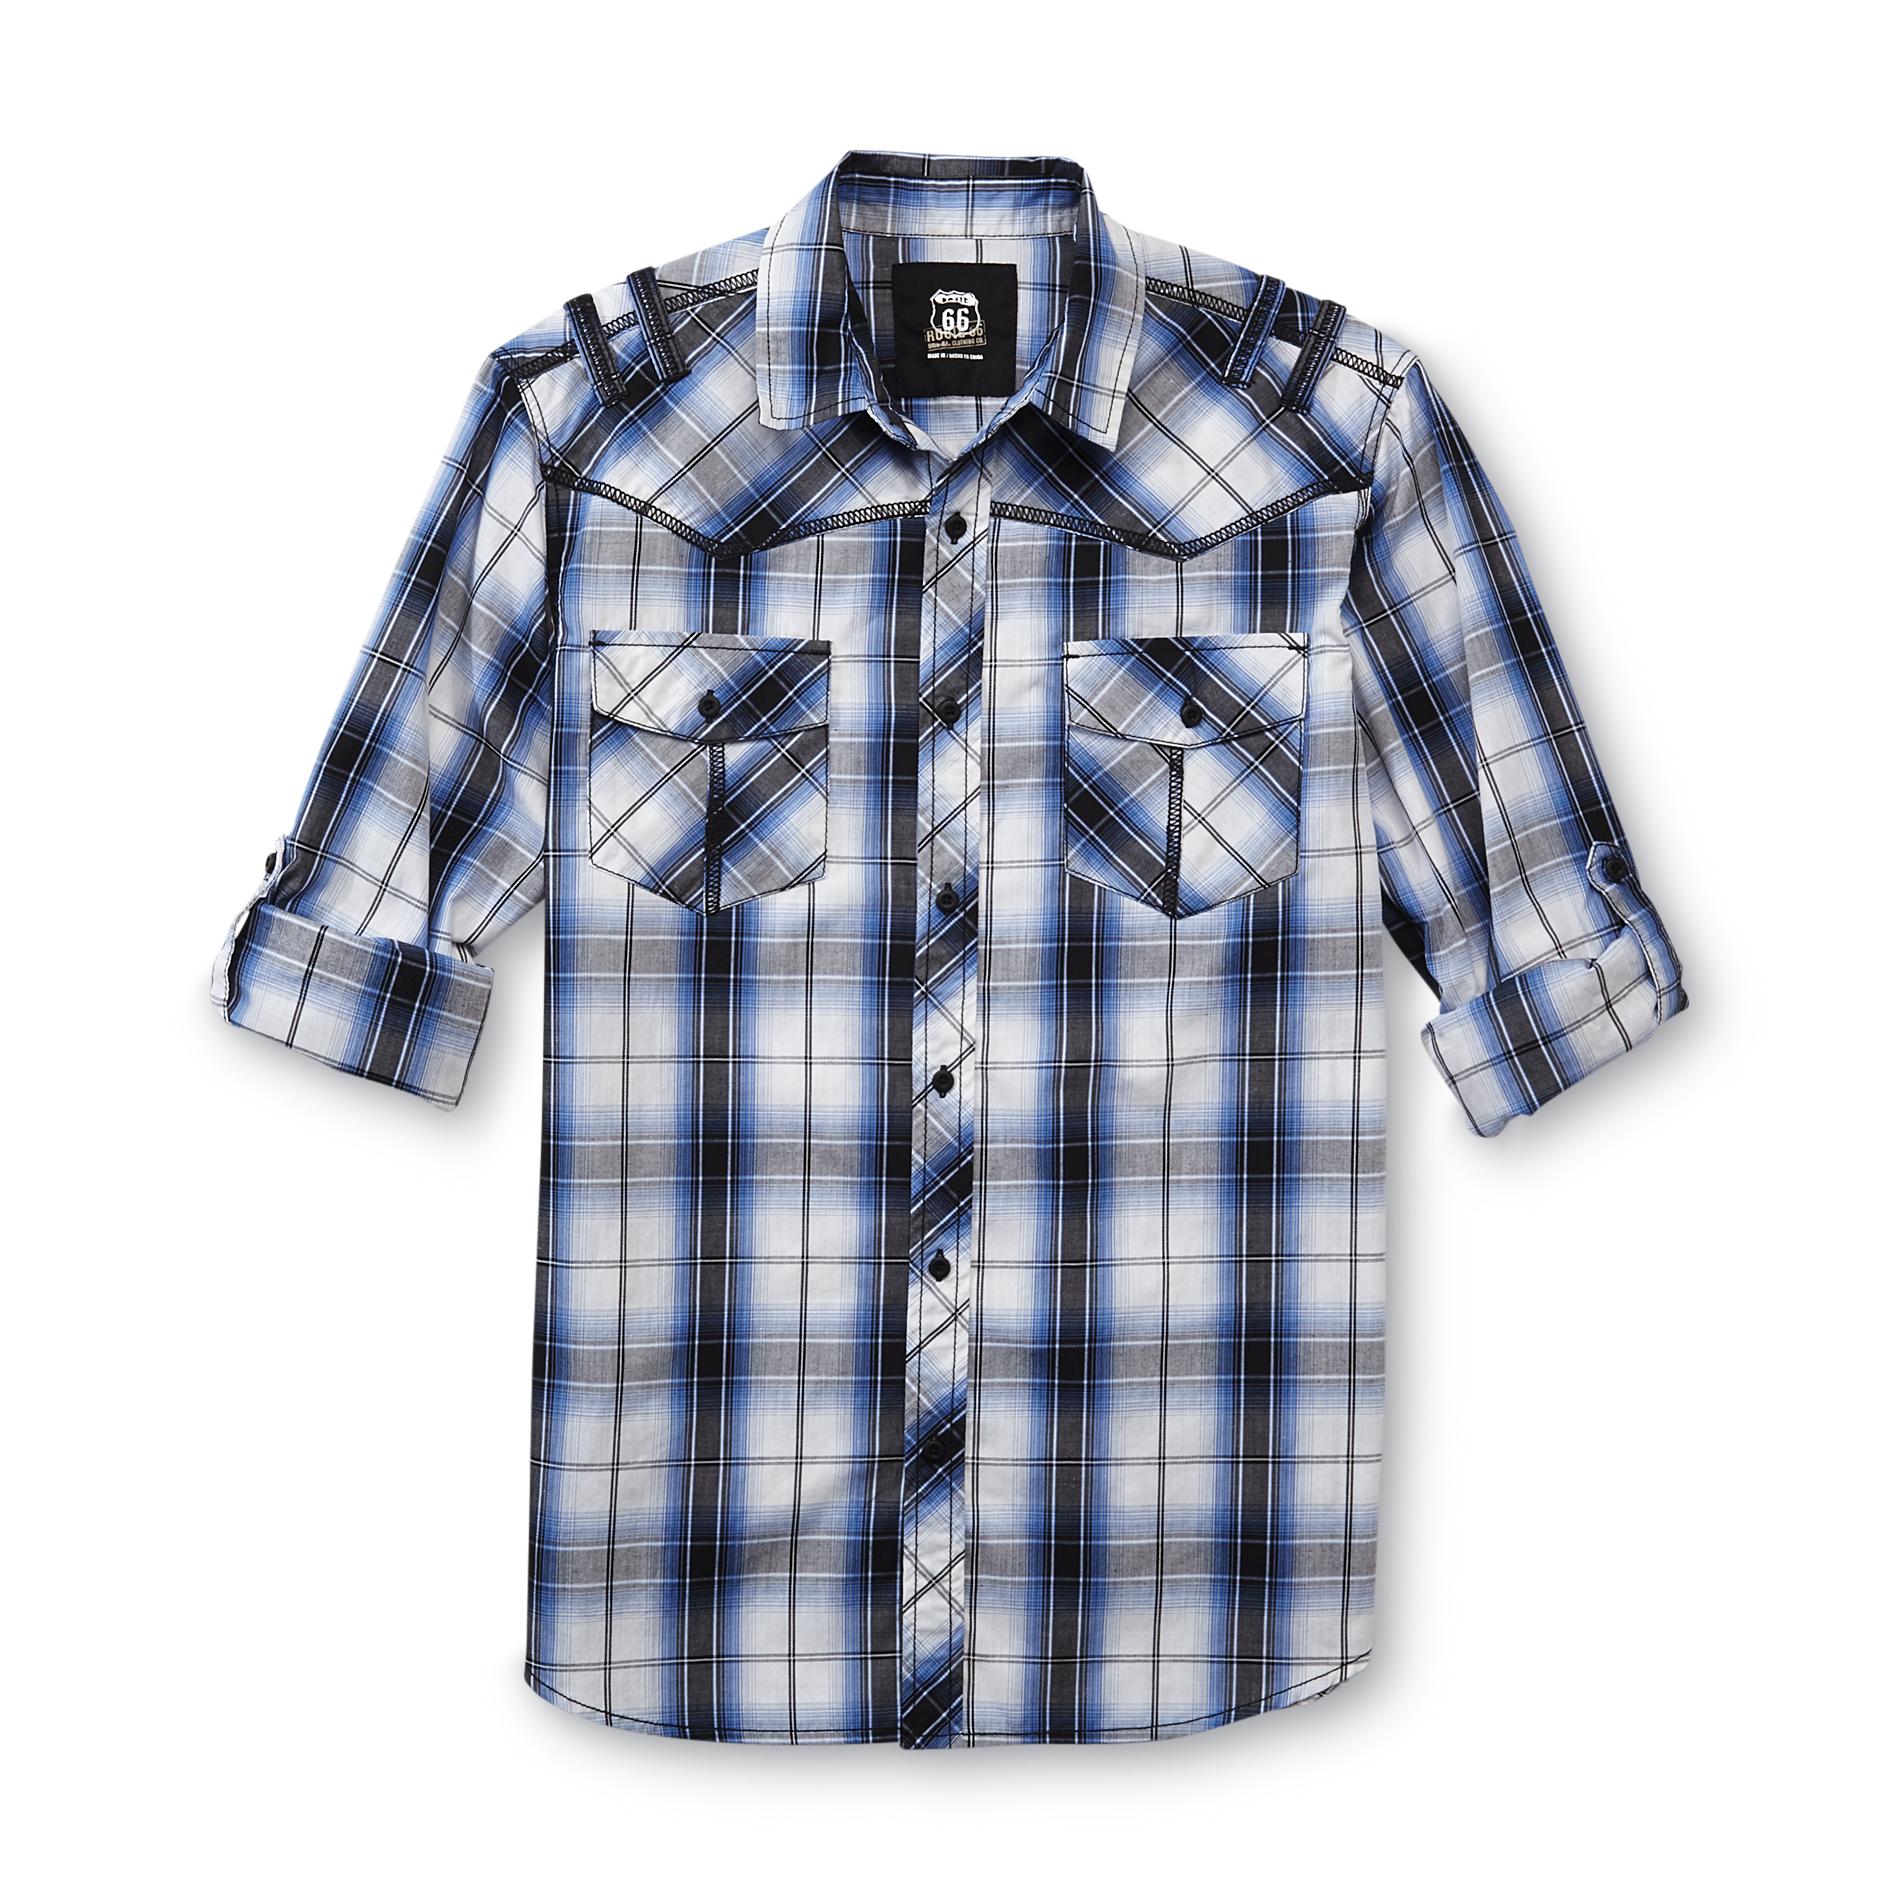 Route 66 Men's Tabbed-Sleeve Casual Shirt - Plaid